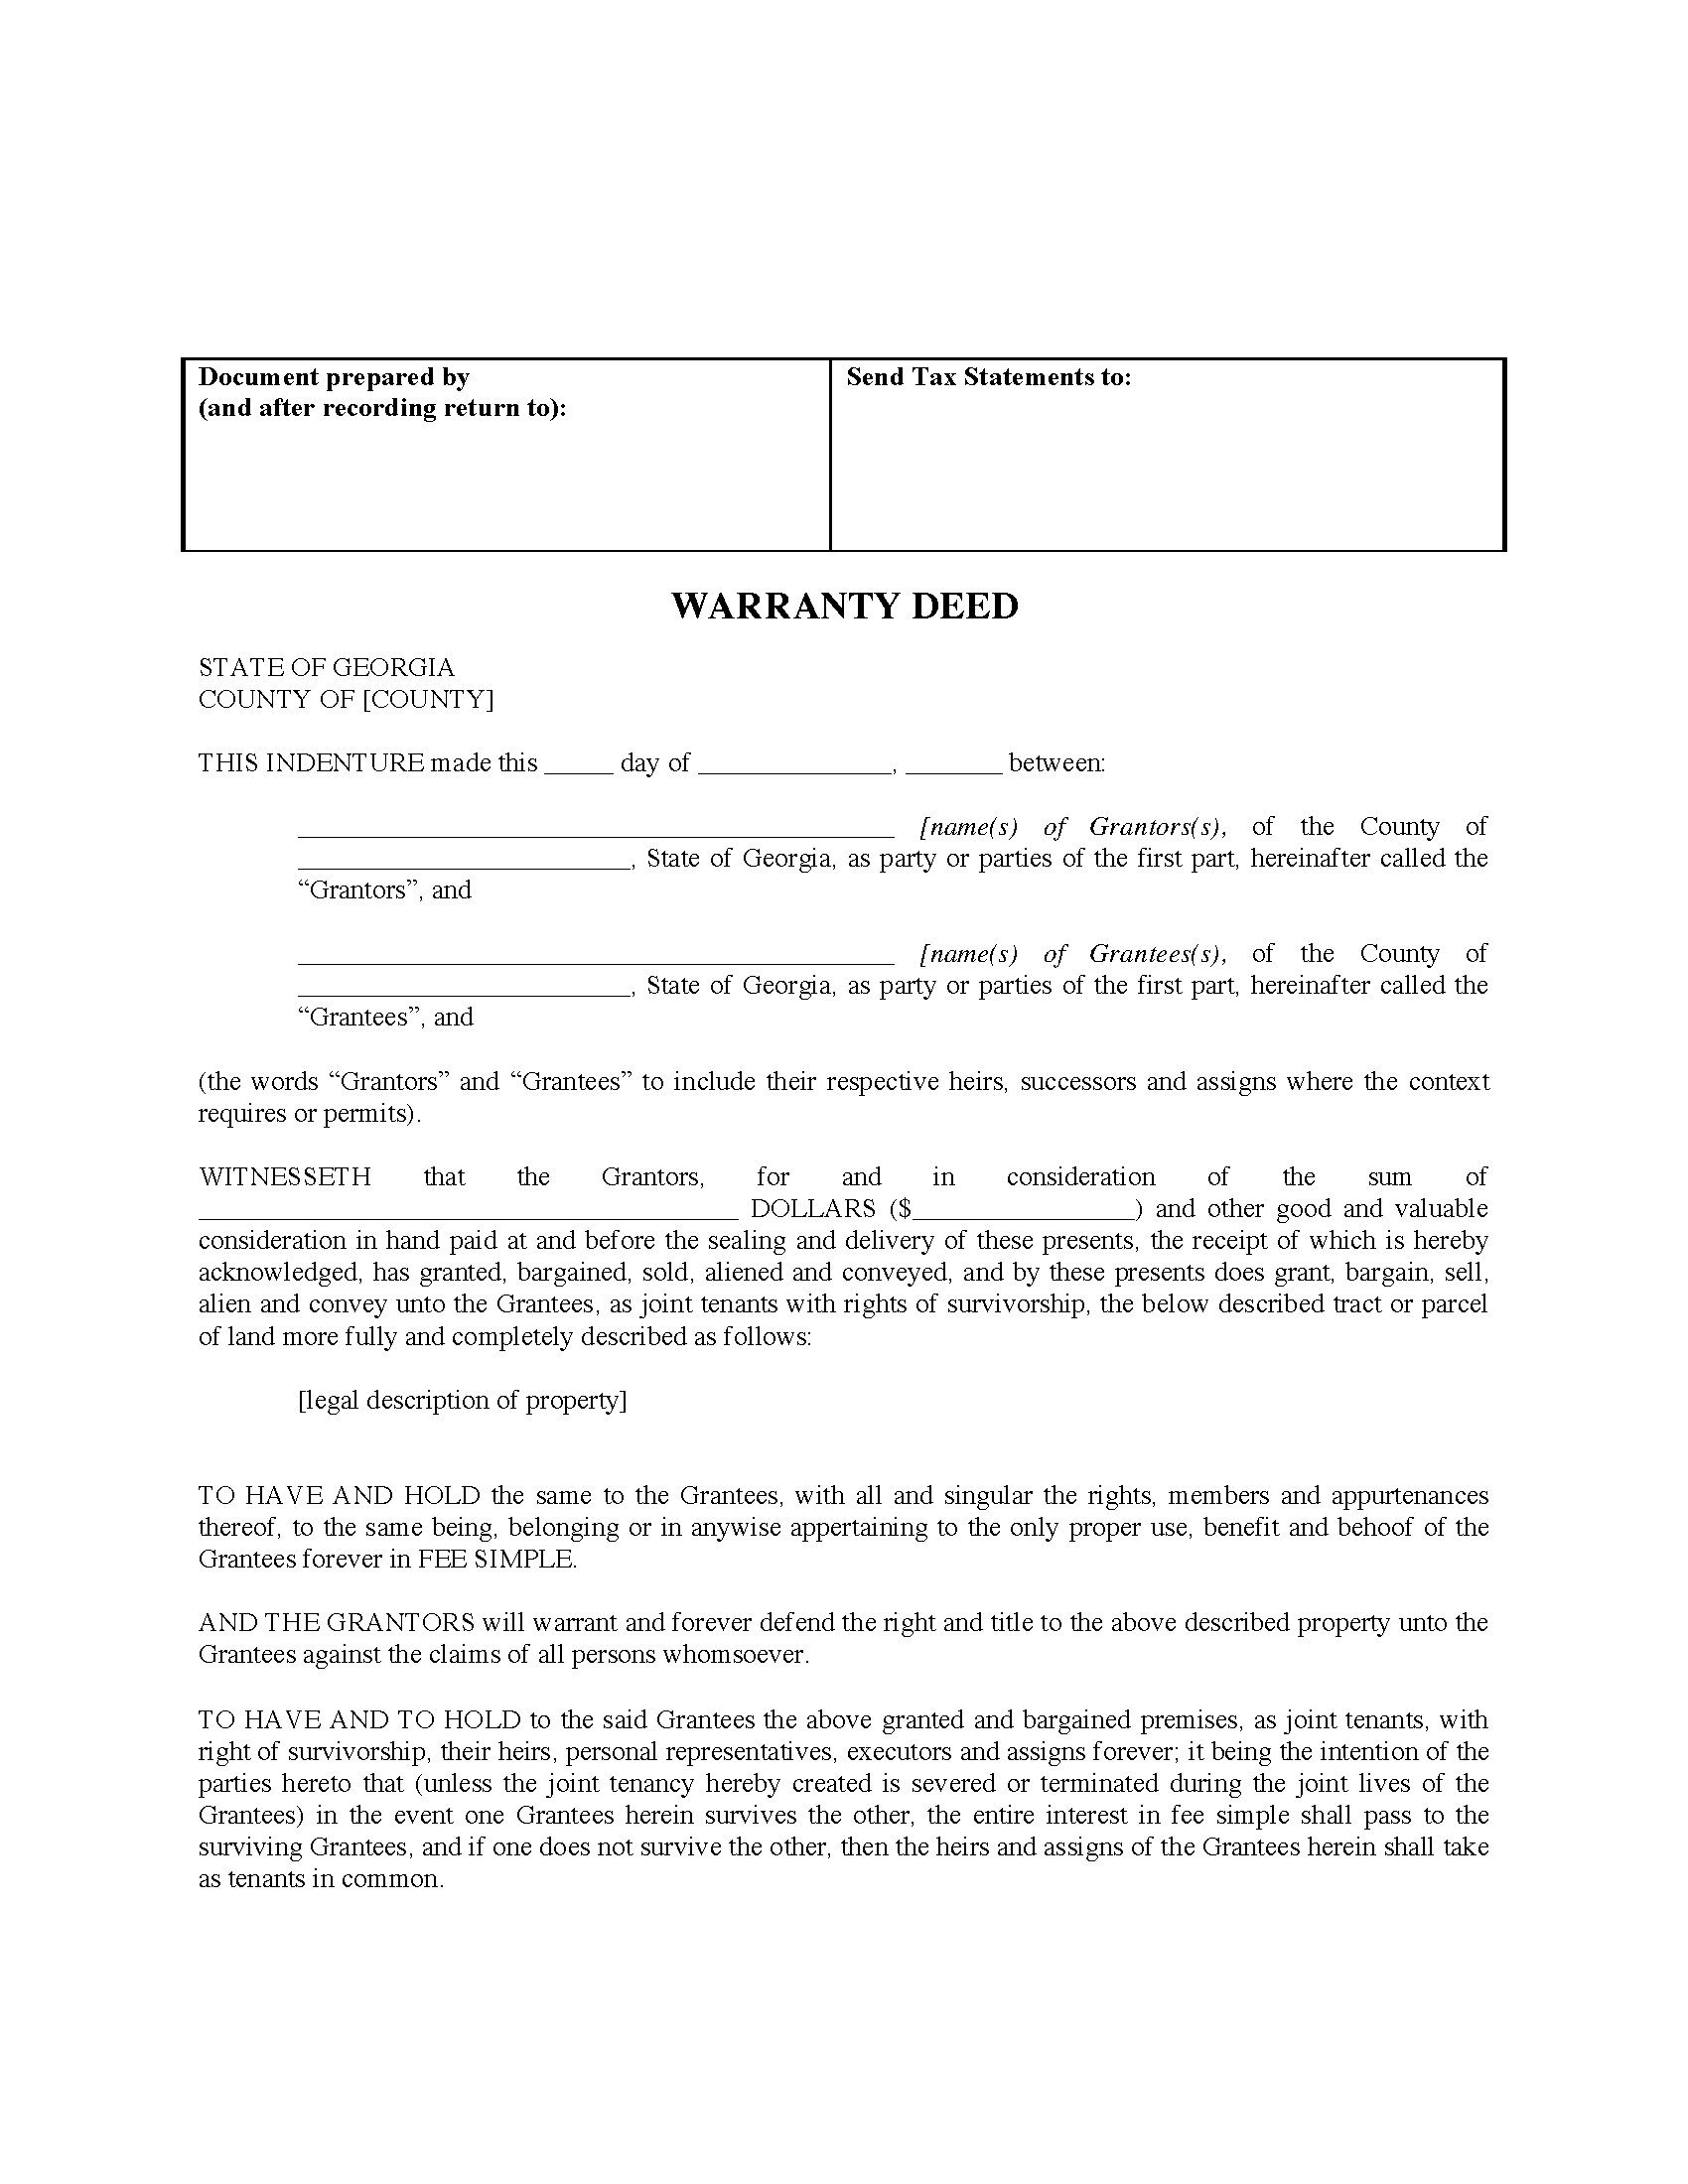 Georgia Warranty Deed For Joint Ownership Legal Forms And Business Templates Megadox Com